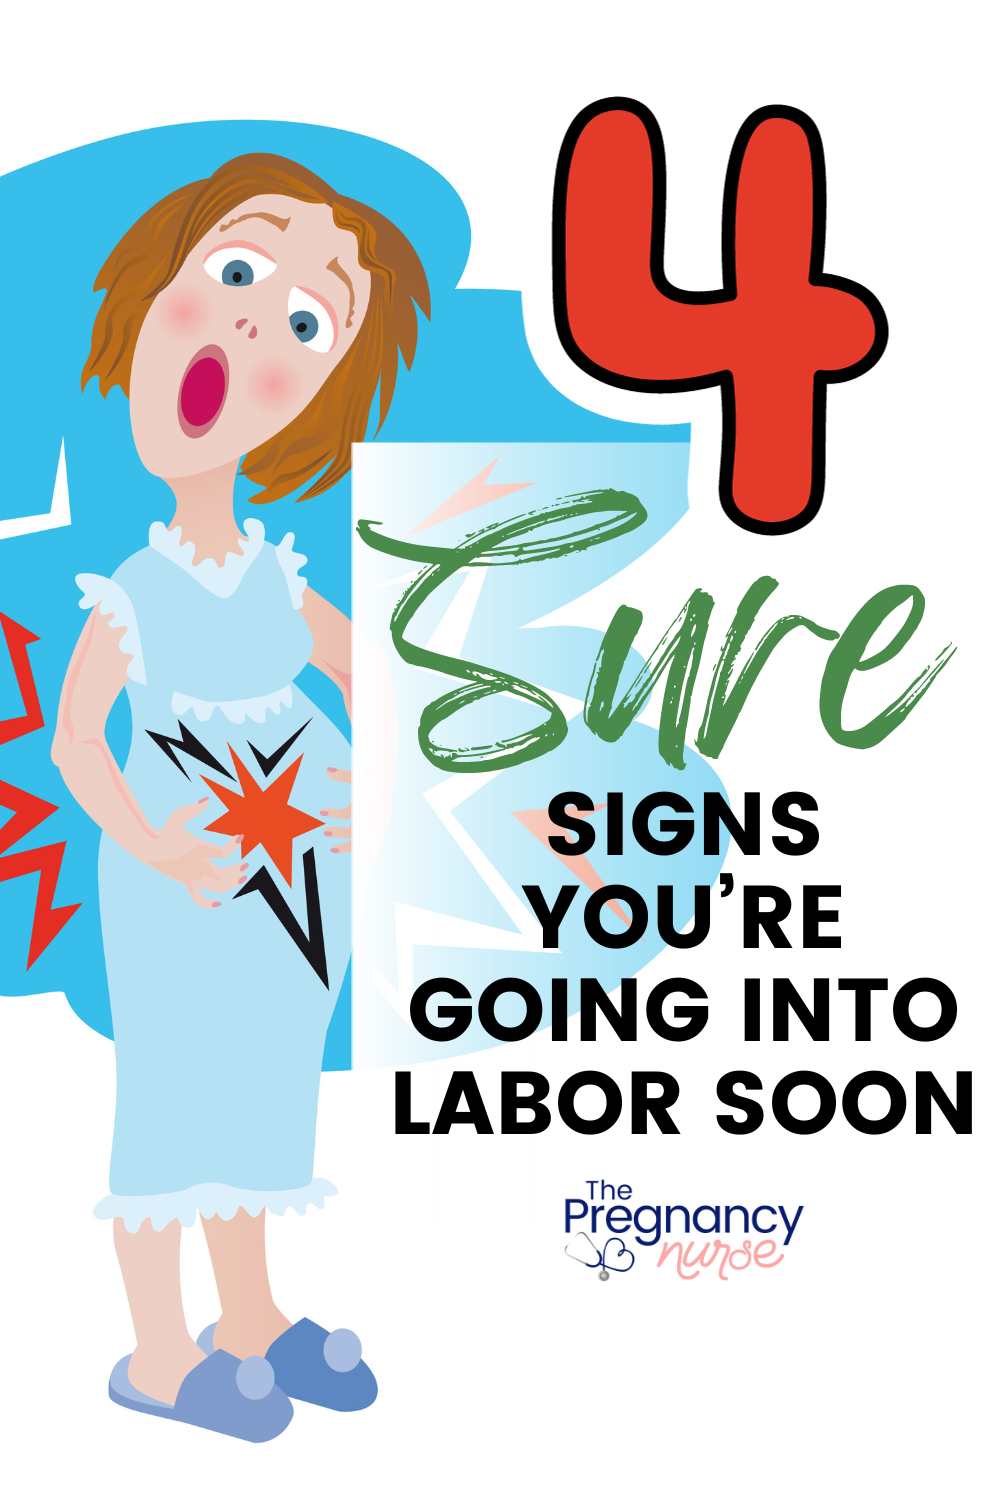 Curious about impending labor signs? Unravel the mystery of childbirth with "Anticipating Baby's Arrival: 4 Signs That Labor is Imminent". Gain insight into your body's secret cues assuring you're on the brink of meeting your little one. Knowledge is power, especially in motherhood's final stages. Let's demystify childbirth together!